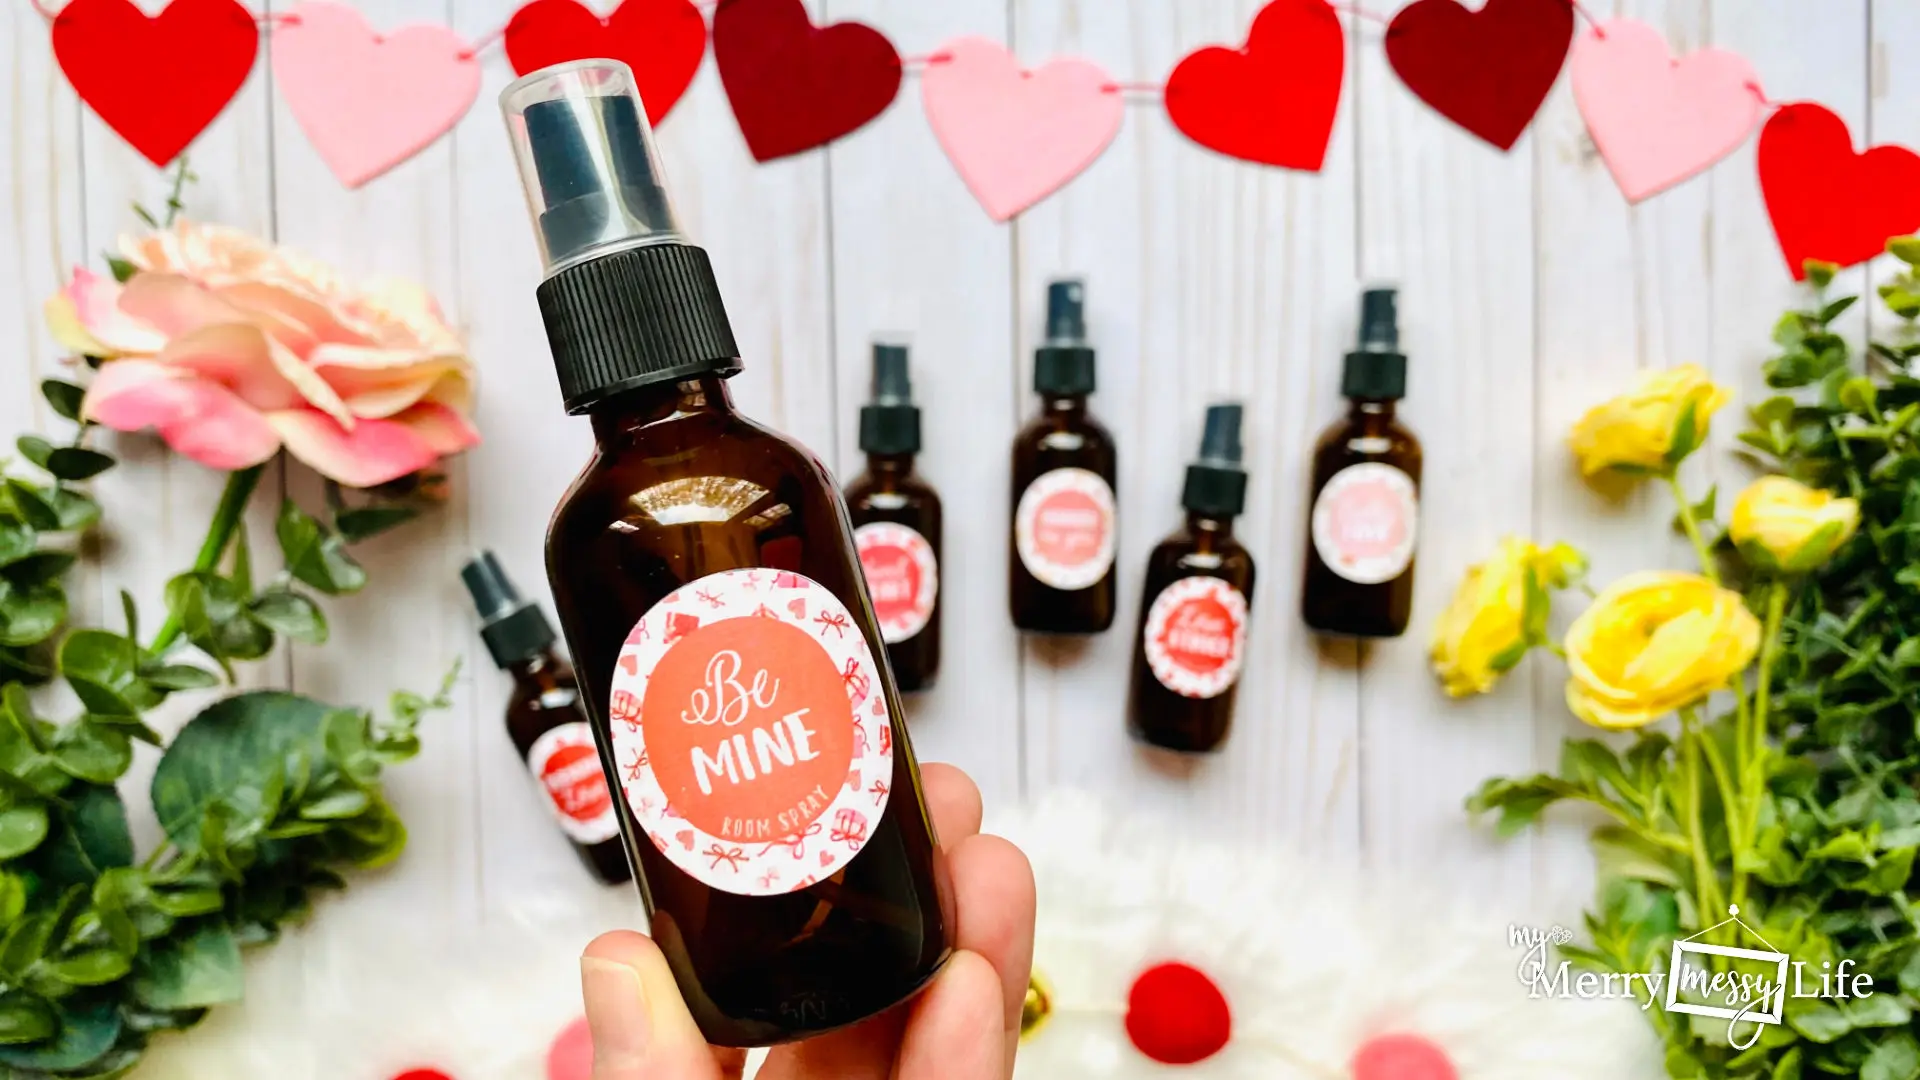 Get In the Mood with Valentine’s Room Spray Recipes